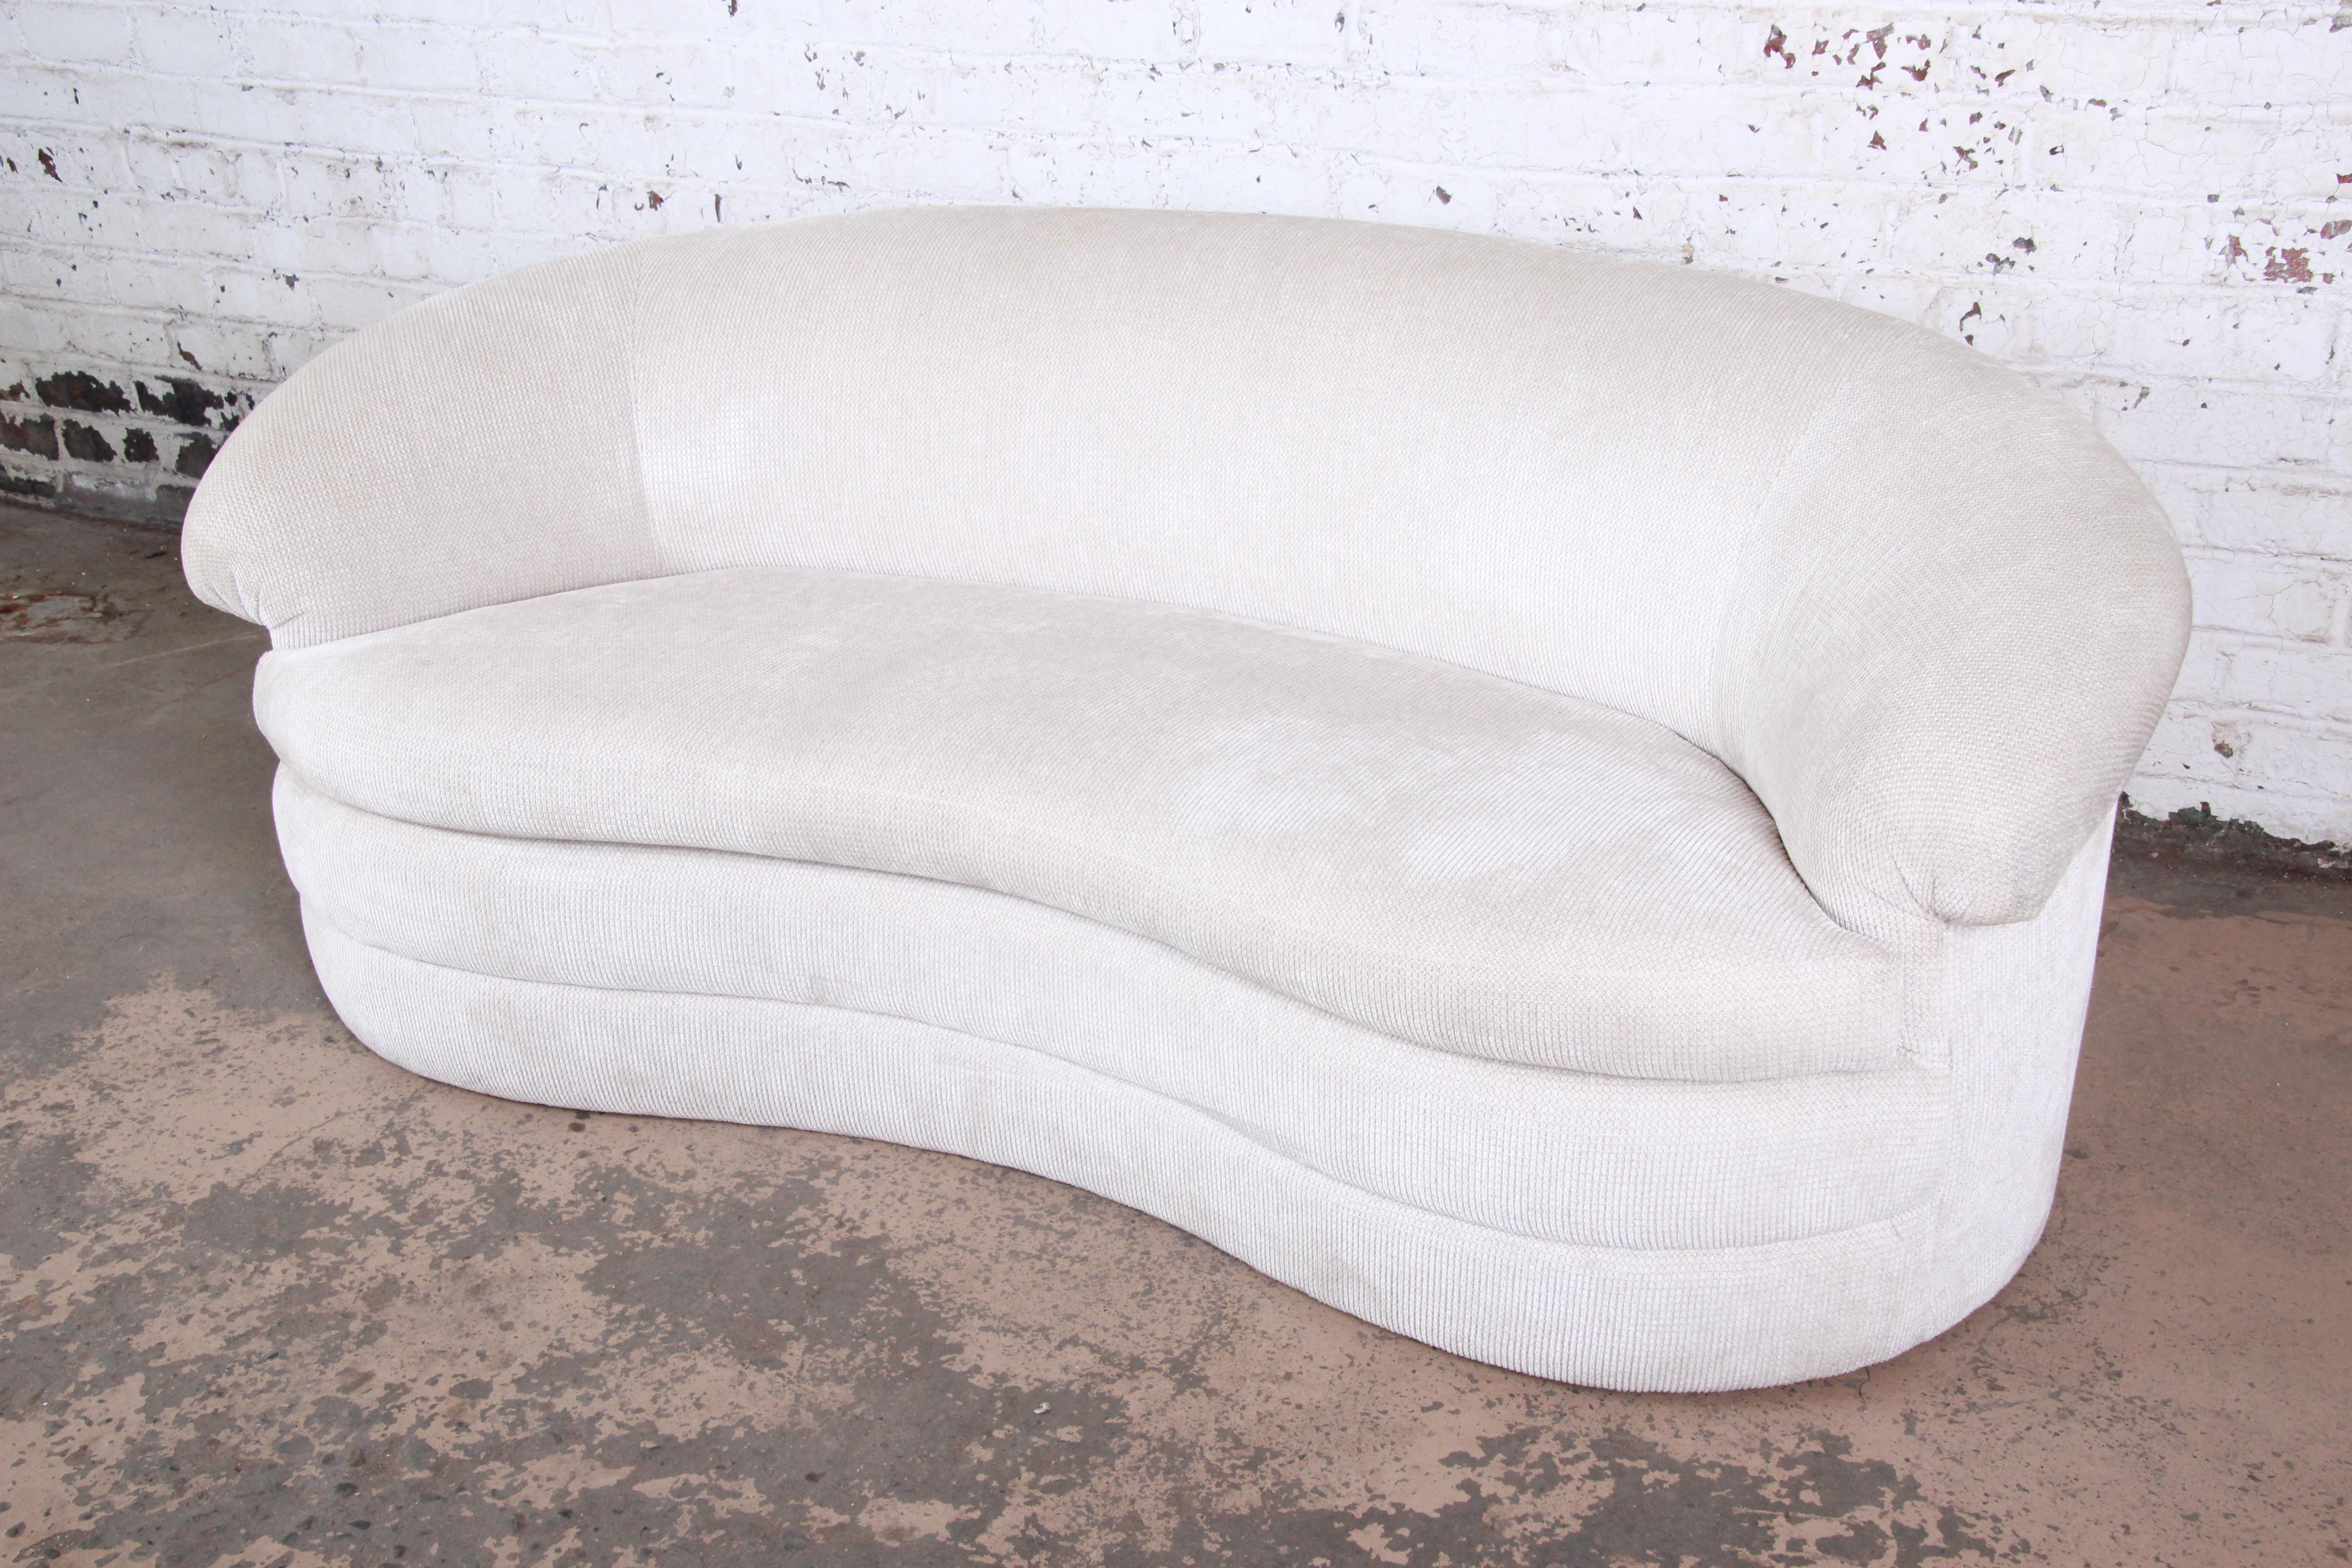 A unique kidney-shaped sofa, circa 1970s. The sofa features a nice sculptural modern design, with a curved arched back and a plinth base. The ivory upholstery is original. The sofa is in good original vintage condition, with normal minor wear